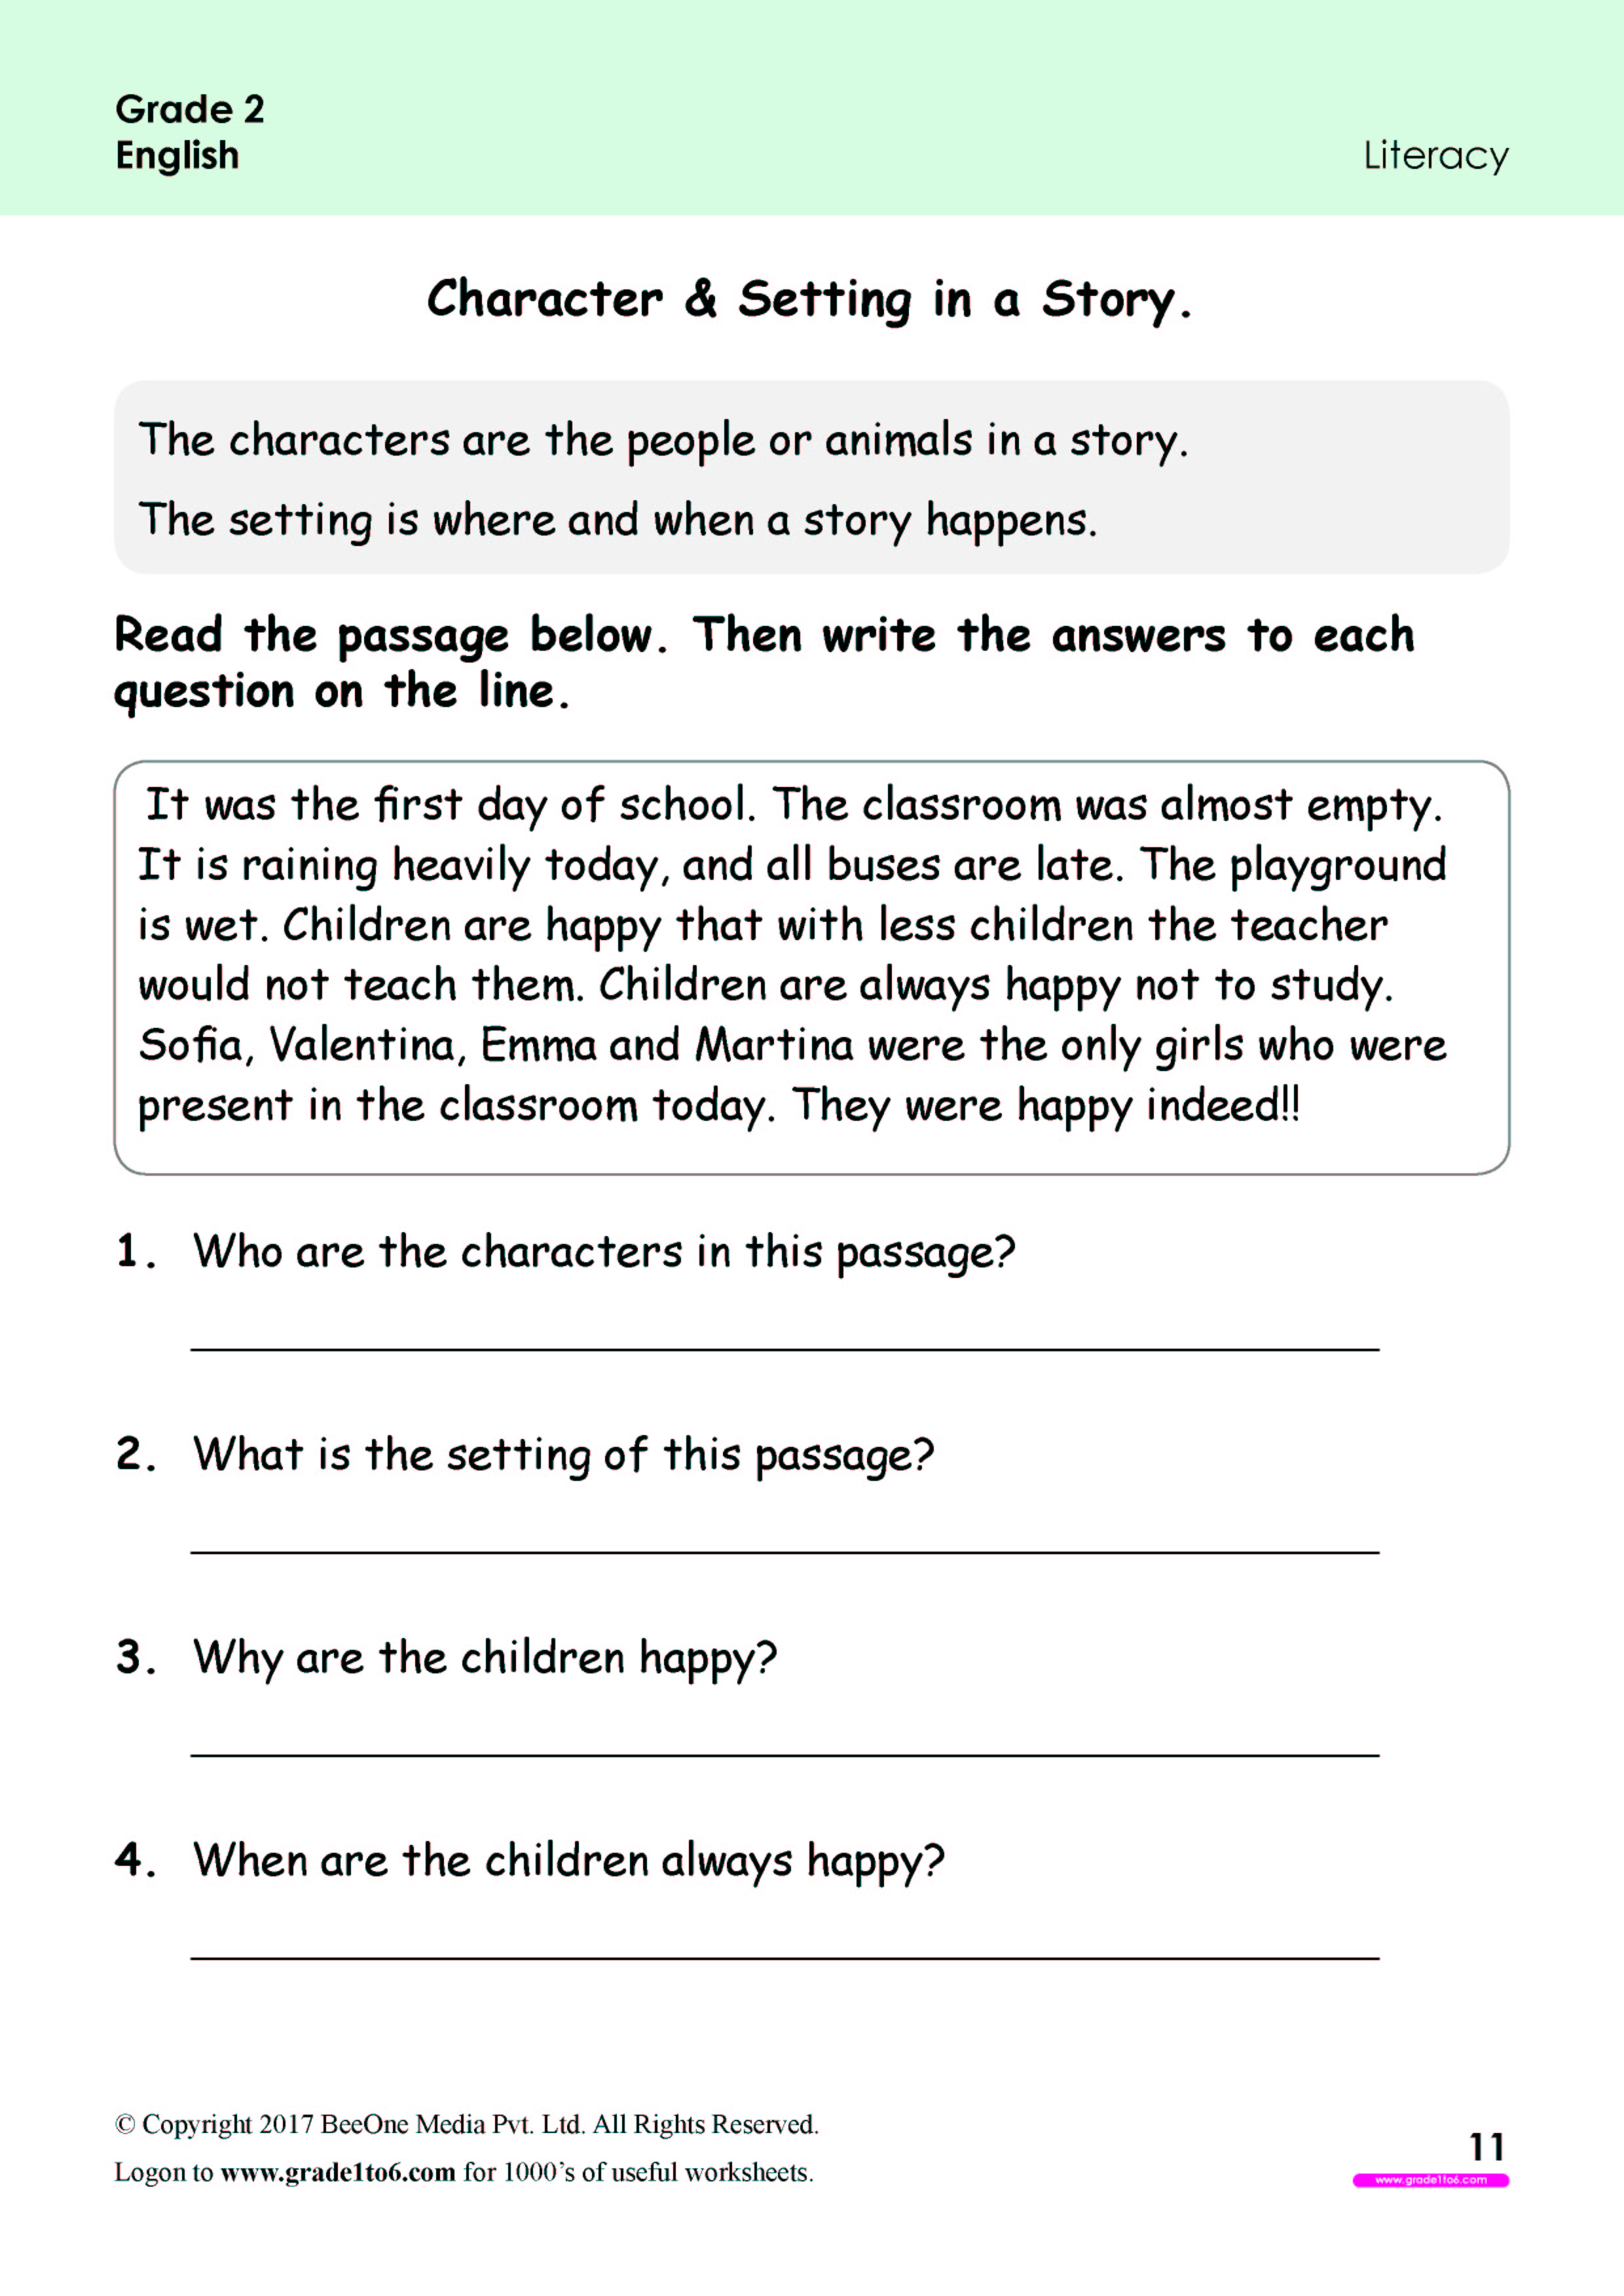 character-settings-in-a-story-worksheets-www-grade1to6